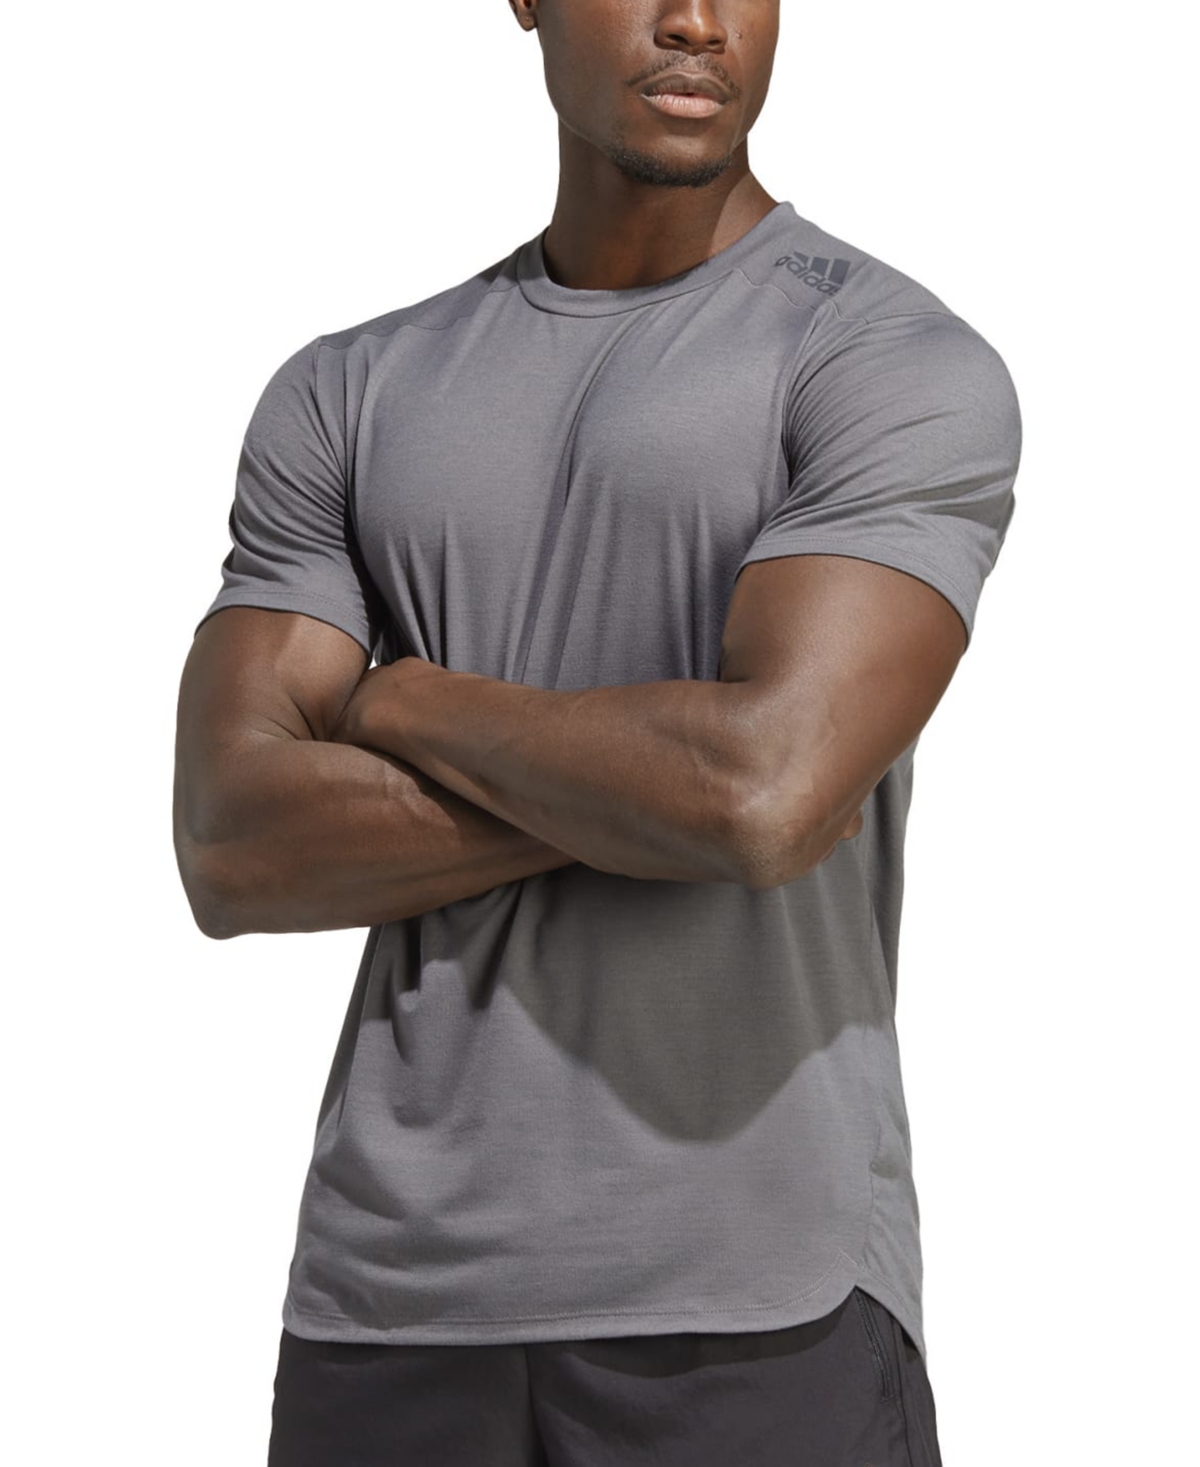 Adidas Originals Designed For Training Performance T-shirt In Grey Five